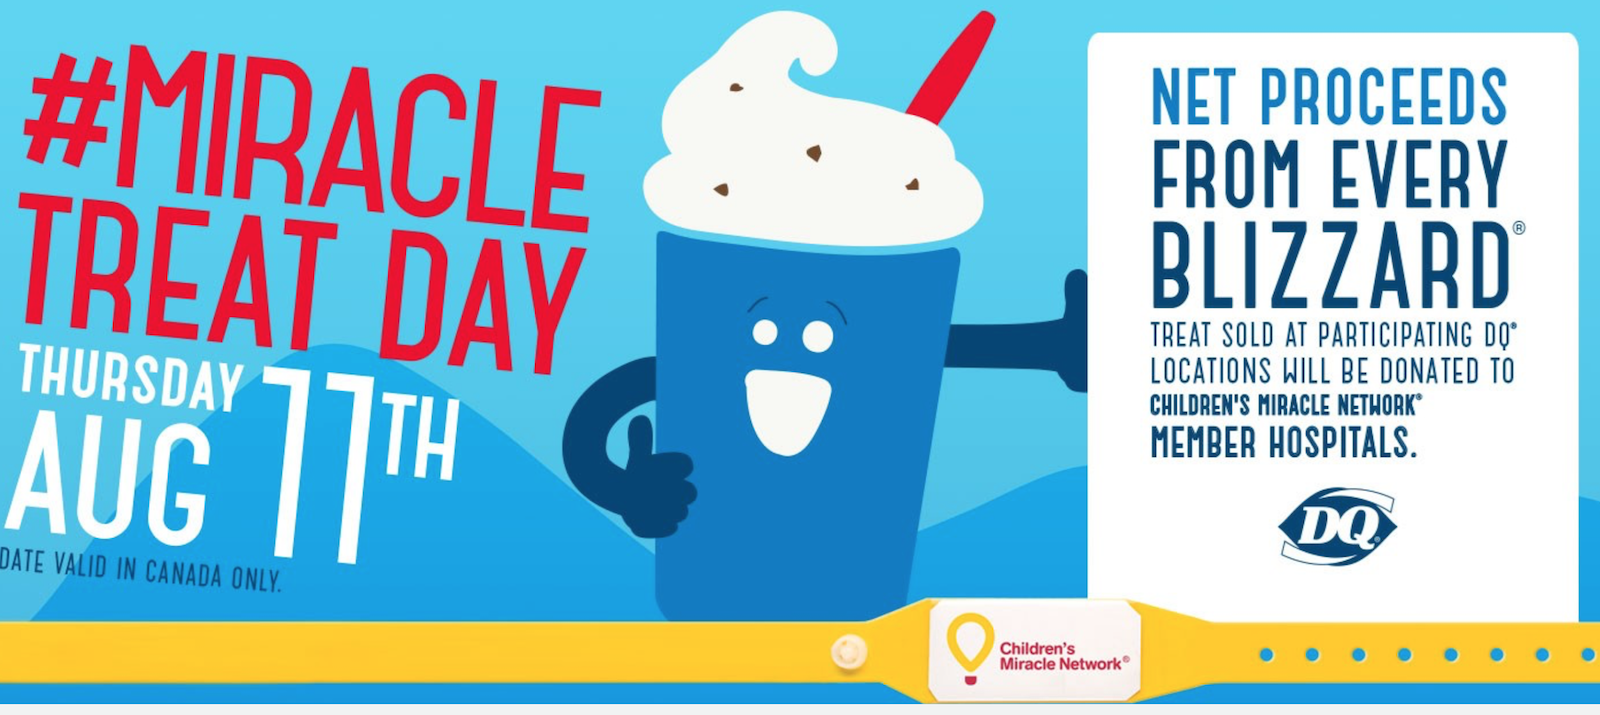 Buy a Blizzard® Treat, Make a Miracle!